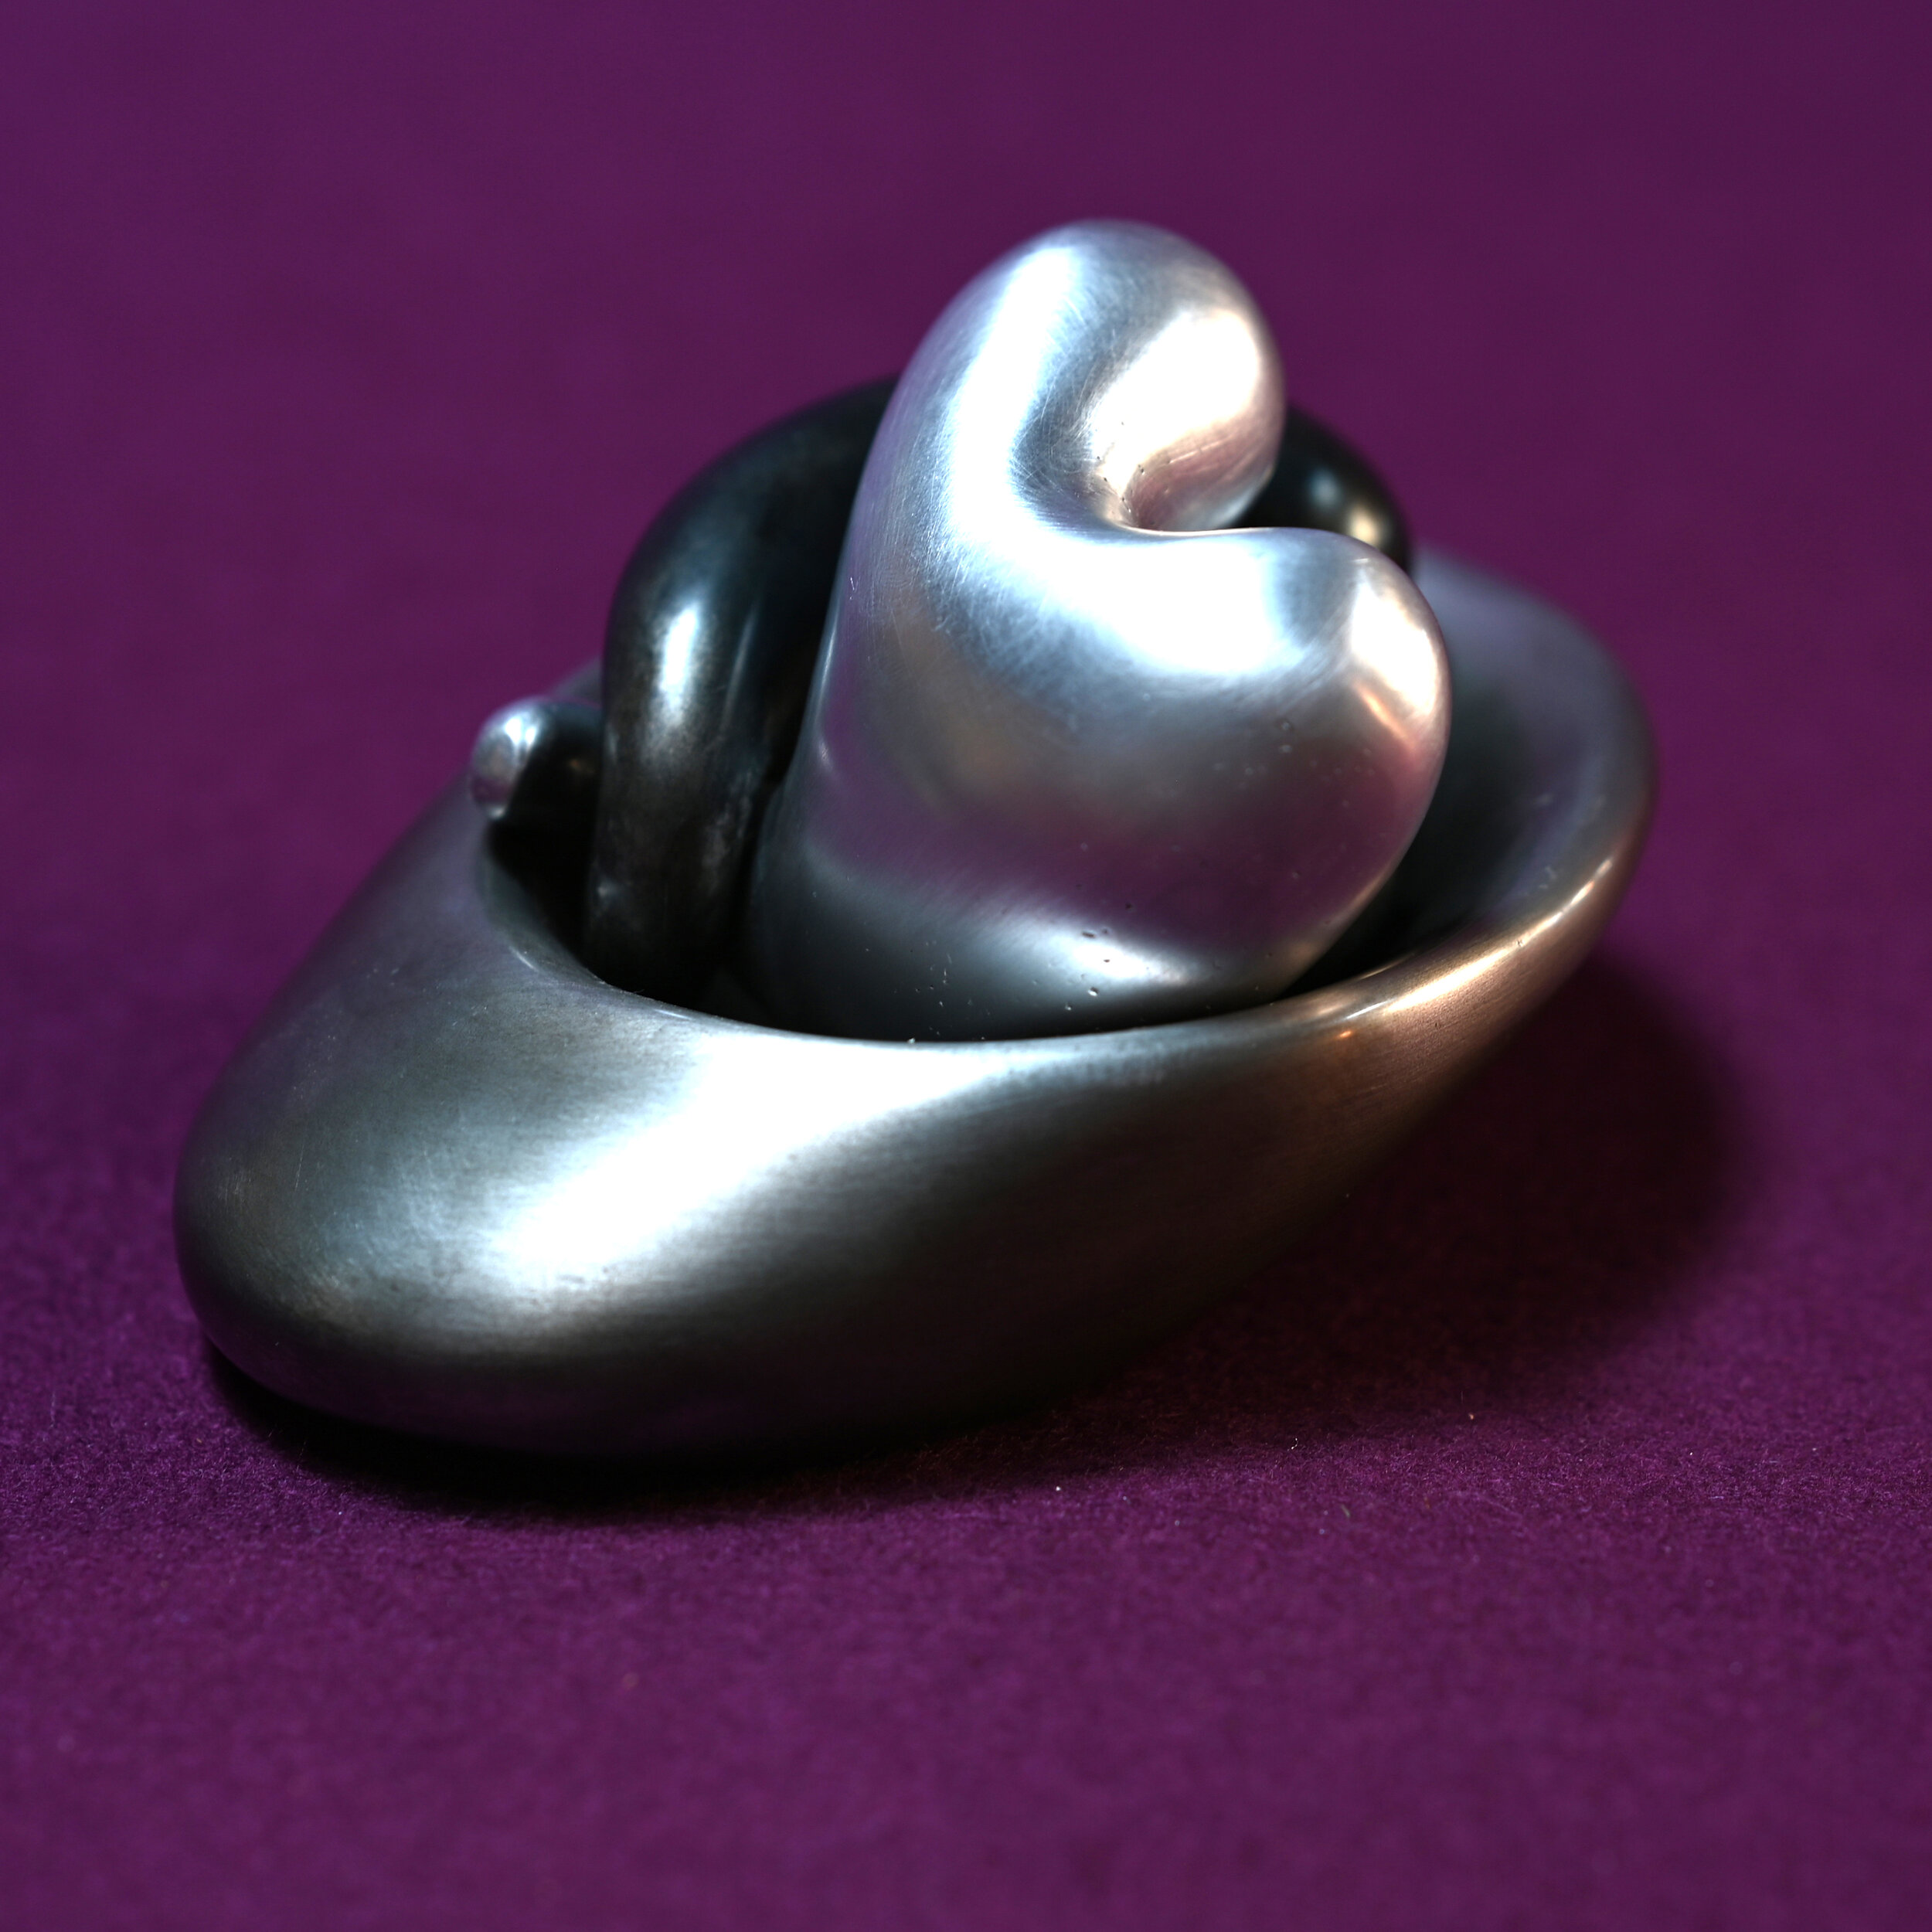 Entwined Heart Bowl